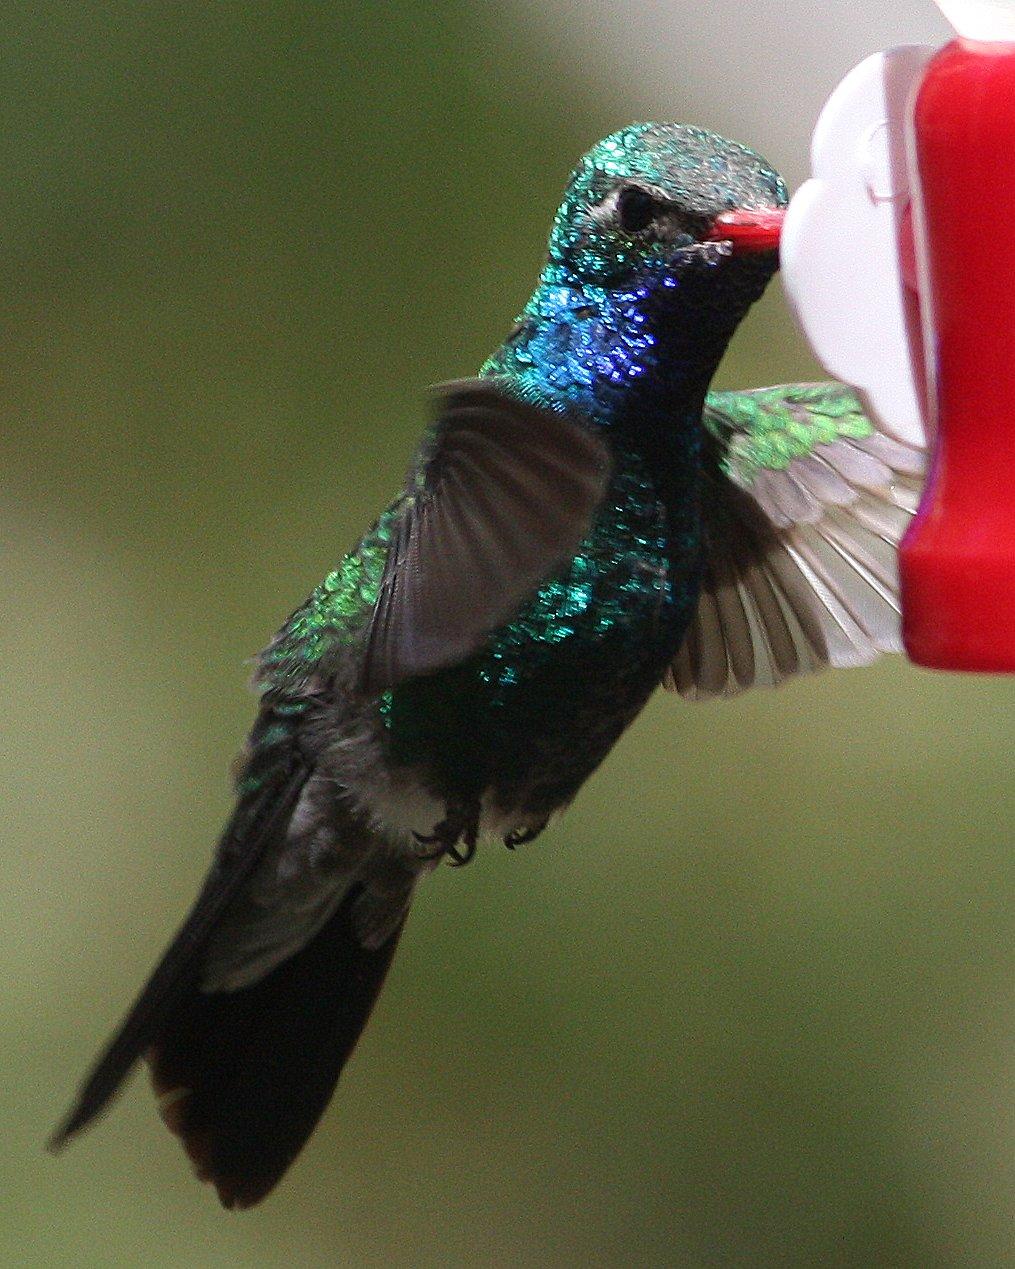 Broad-billed Hummingbird Photo by Andrew Core